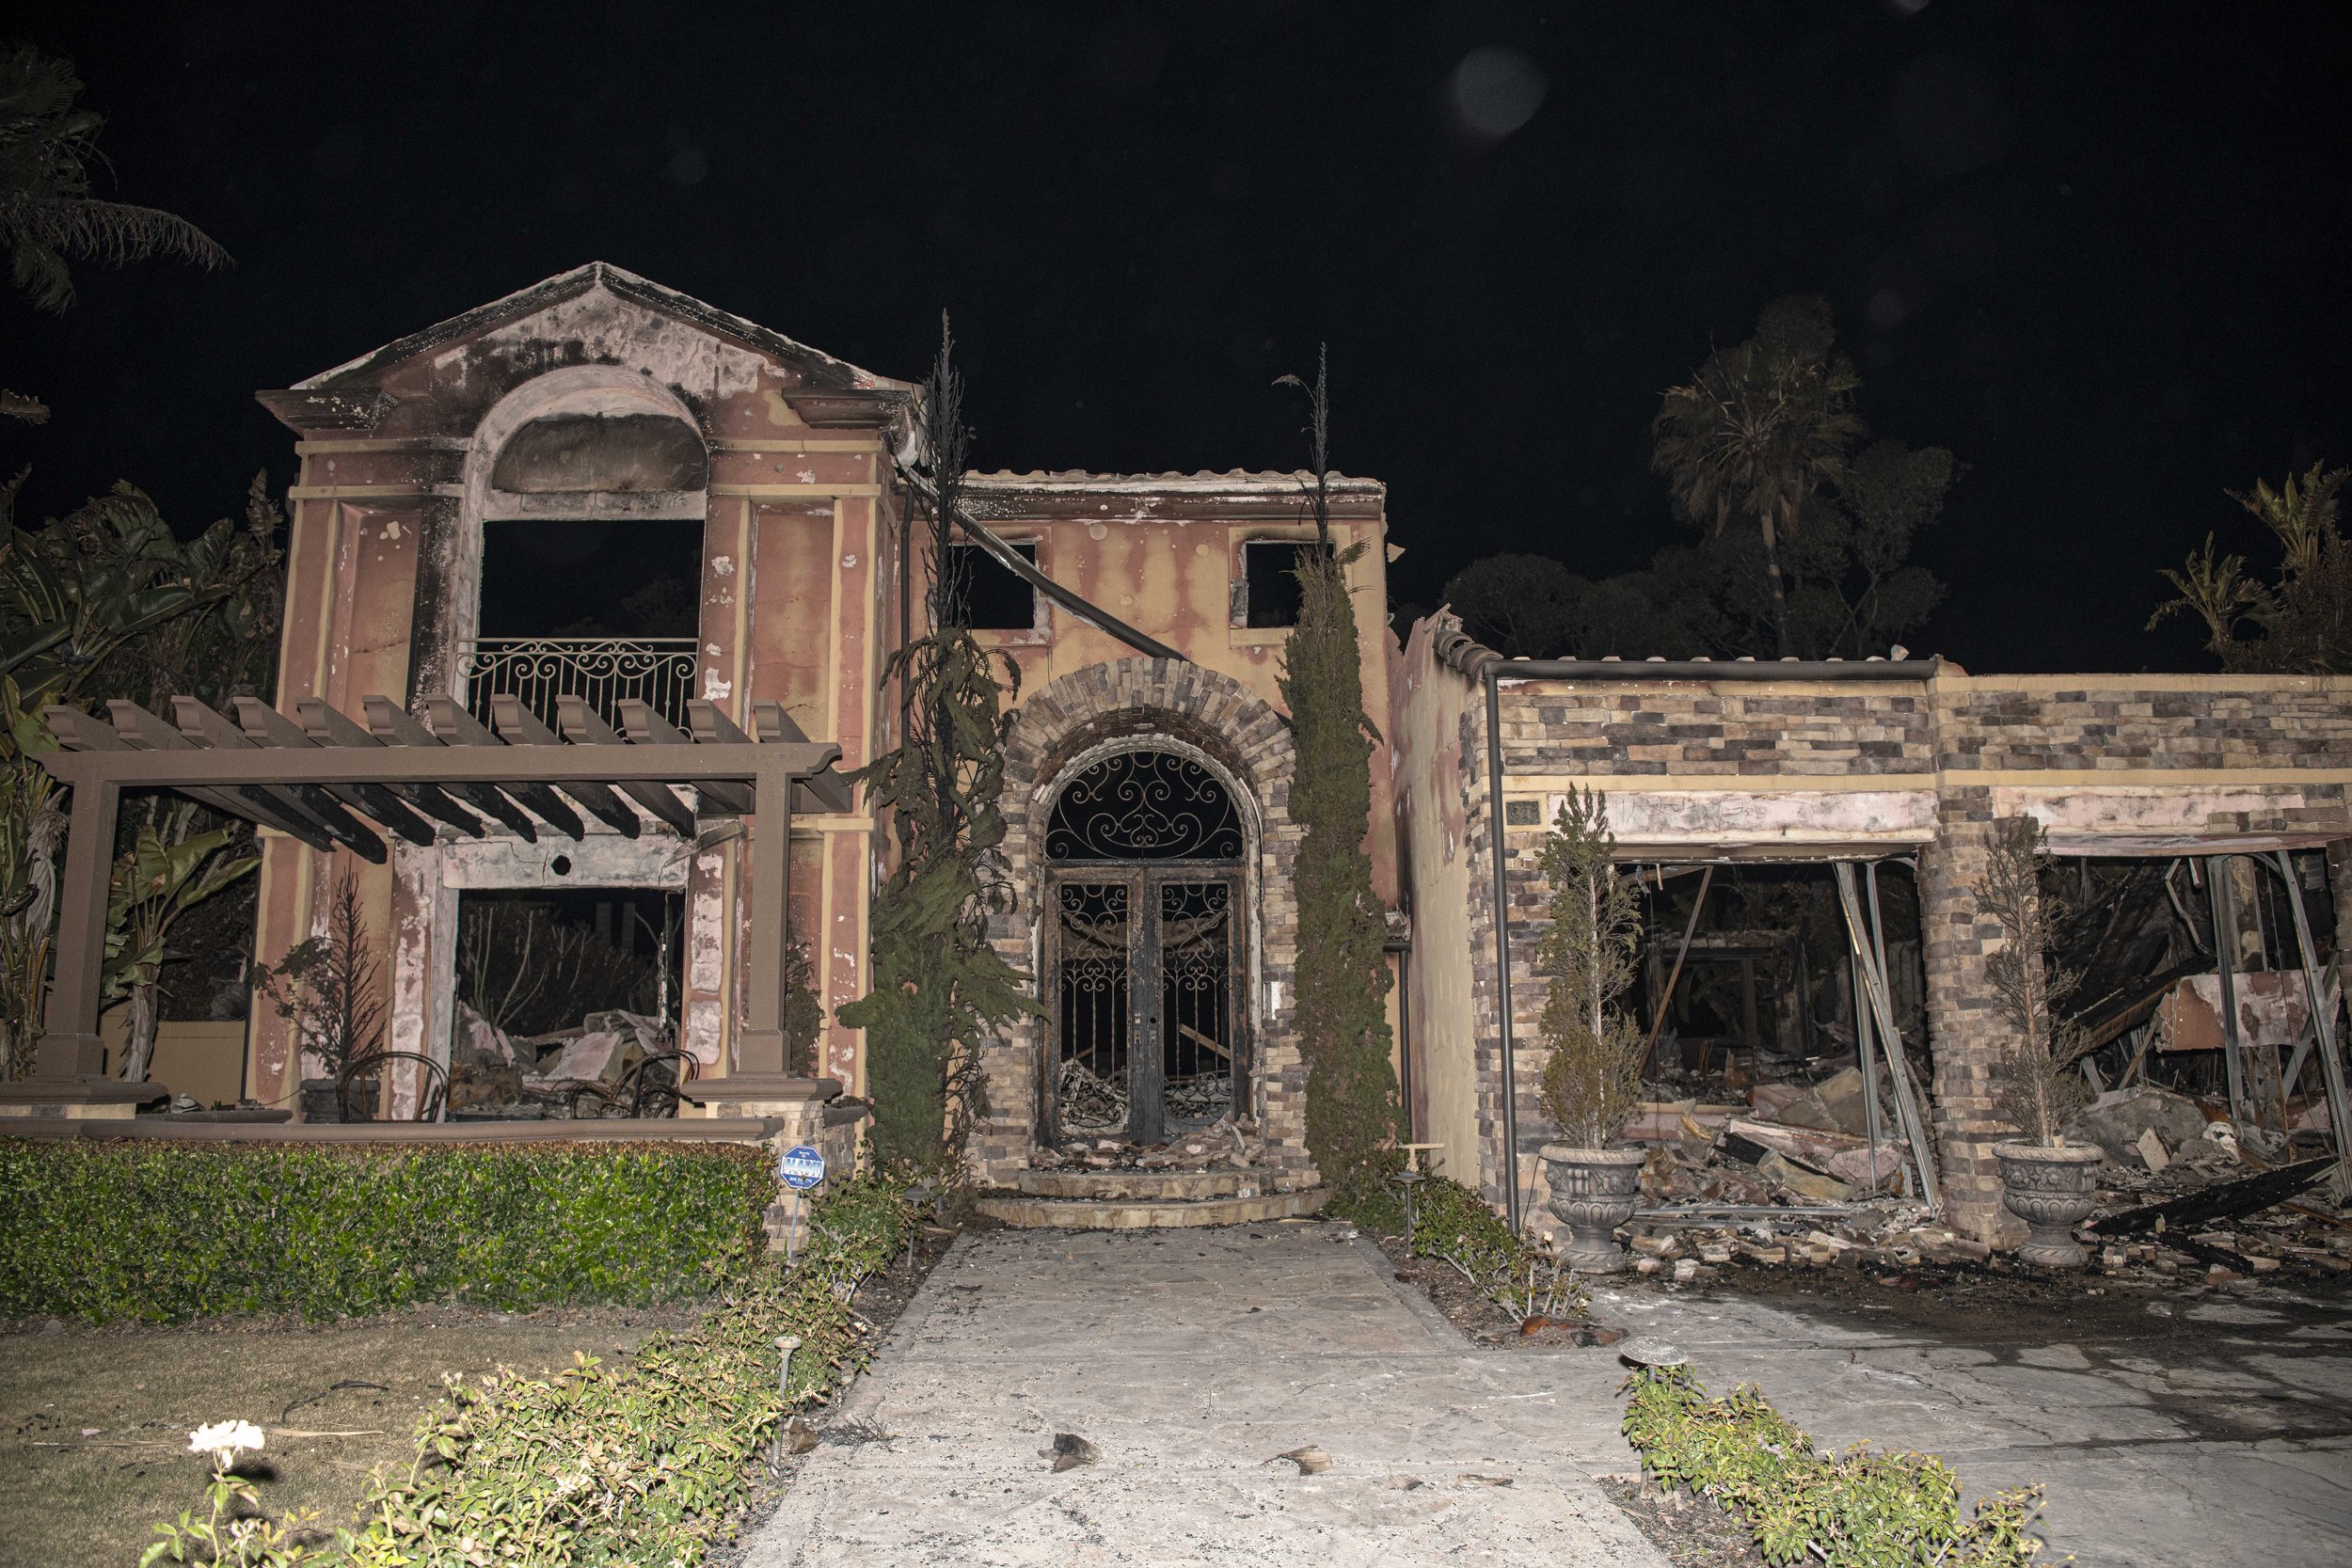  Reminants of what was once a multi-million dollar home in Laguna Nigel, California after a small brush fire that occured on Wedneday, May 11th, turned into a firey blaze that took over 200+ acres and 23 Confirmed homes. According to San Diego Firefi